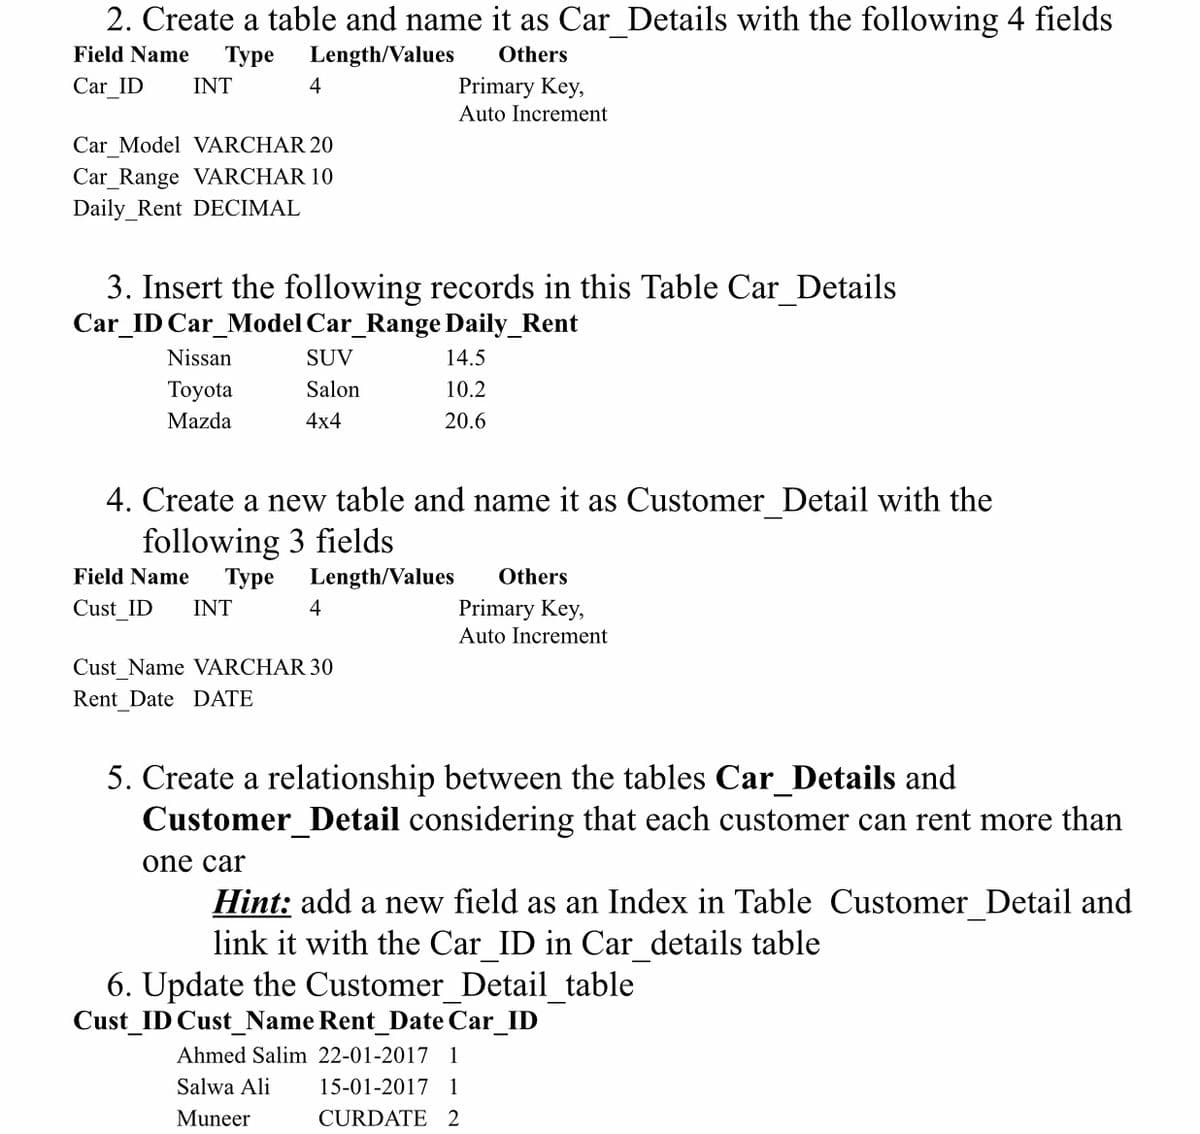 2. Create a table and name it as Car_Details with the following 4 fields
Field Name
Туре
Length/Values
Others
Car ID
INT
4
Primary Key,
Auto Increment
Car Model VARCHAR 20
Car_Range VARCHAR 10
Daily_Rent DECIMAL
3. Insert the following records in this Table Car_Details
Car_ID Car_Model Car_Range Daily_Rent
Nissan
SUV
14.5
Тoyota
Salon
10.2
Mazda
4x4
20.6
4. Create a new table and name it as Customer Detail with the
following 3 fields
Field Name
Туре
Length/Values
Others
Cust ID
INT
4
Primary Key,
Auto Increment
Cust_Name VARCHAR 30
Rent Date DATE
5. Create a relationship between the tables Car_Details and
Customer_Detail considering that each customer can rent more than
one car
Hint: add a new field as an Index in Table Customer_Detail and
link it with the Car ID in Car details table
6. Update the Customer Detail table
Cust_ID Cust_Name Rent_Date Car_ID
Ahmed Salim 22-01-2017 1
Salwa Ali
15-01-2017 1
Muneer
CURDATE 2
